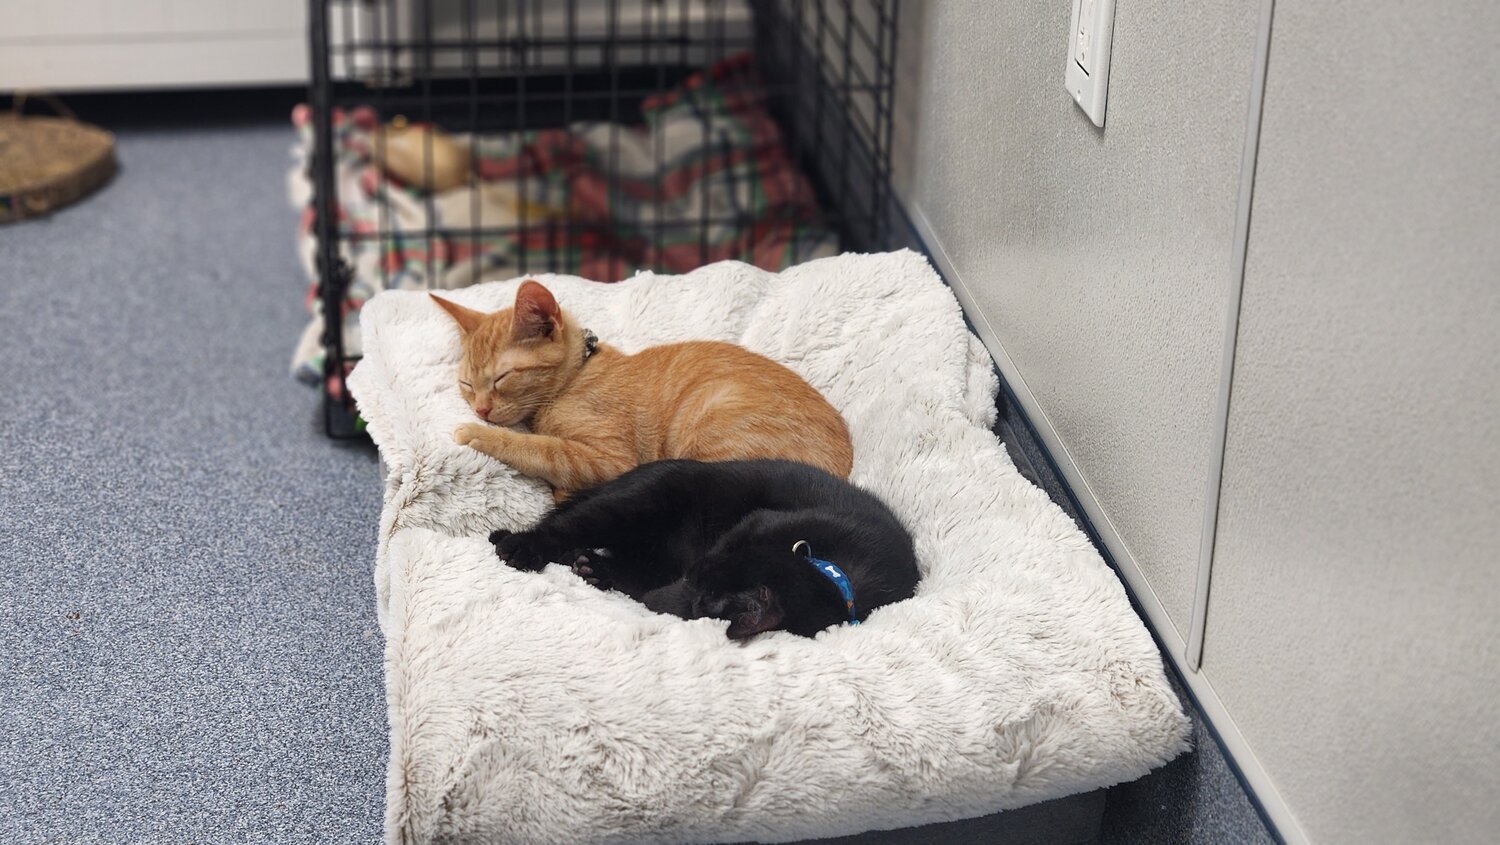 Cove Animal Rescue welcomed 30 new kittens to their designated cat rooms. These two kittens have plenty of plush pillows available to relax on.